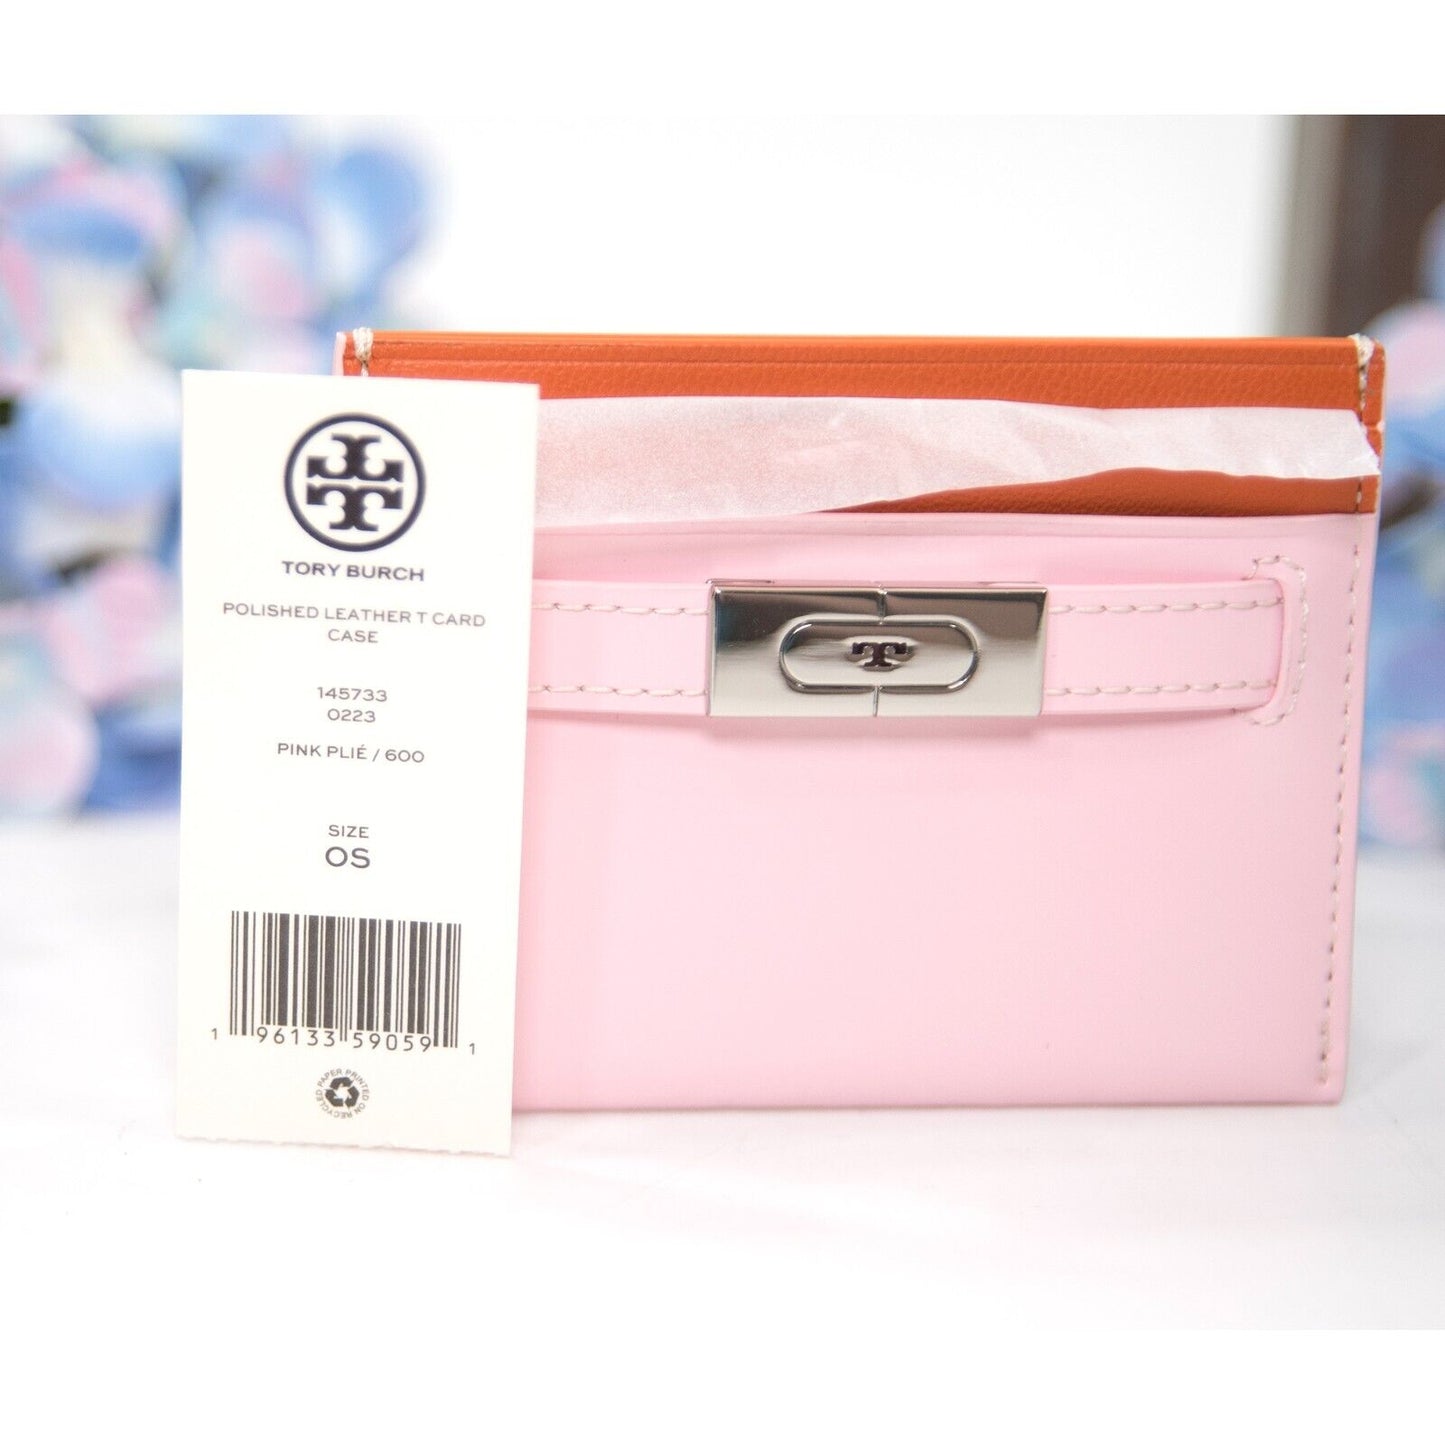 Tory Burch Pink Plie Polished Leather Colorblock Logo Card Case Mini Wallet NWT